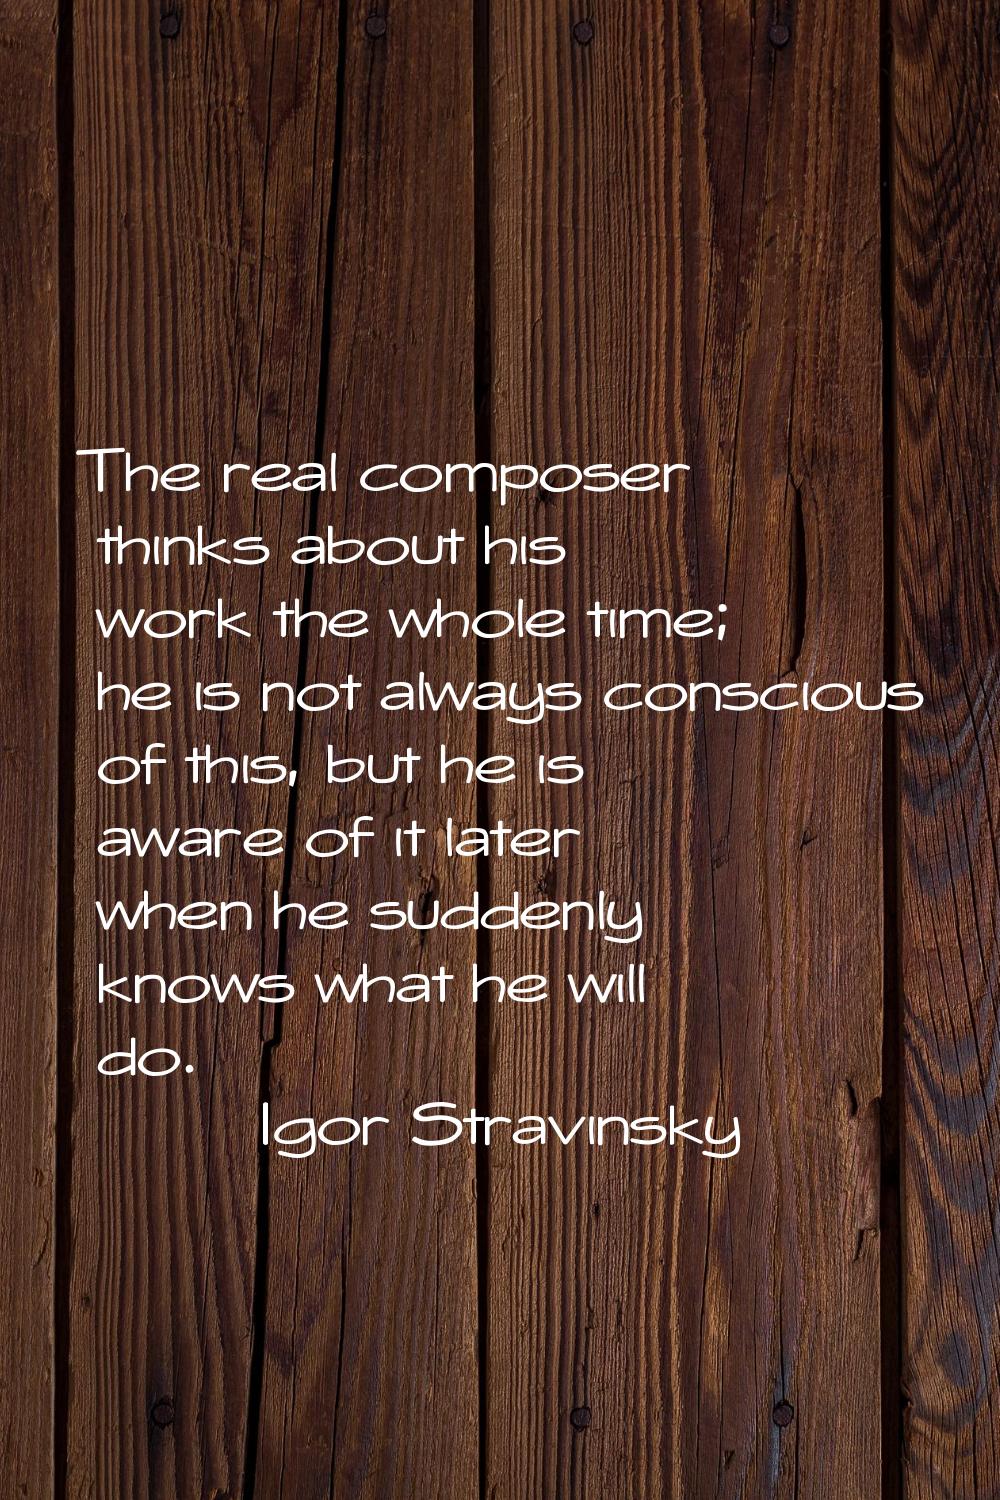 The real composer thinks about his work the whole time; he is not always conscious of this, but he 